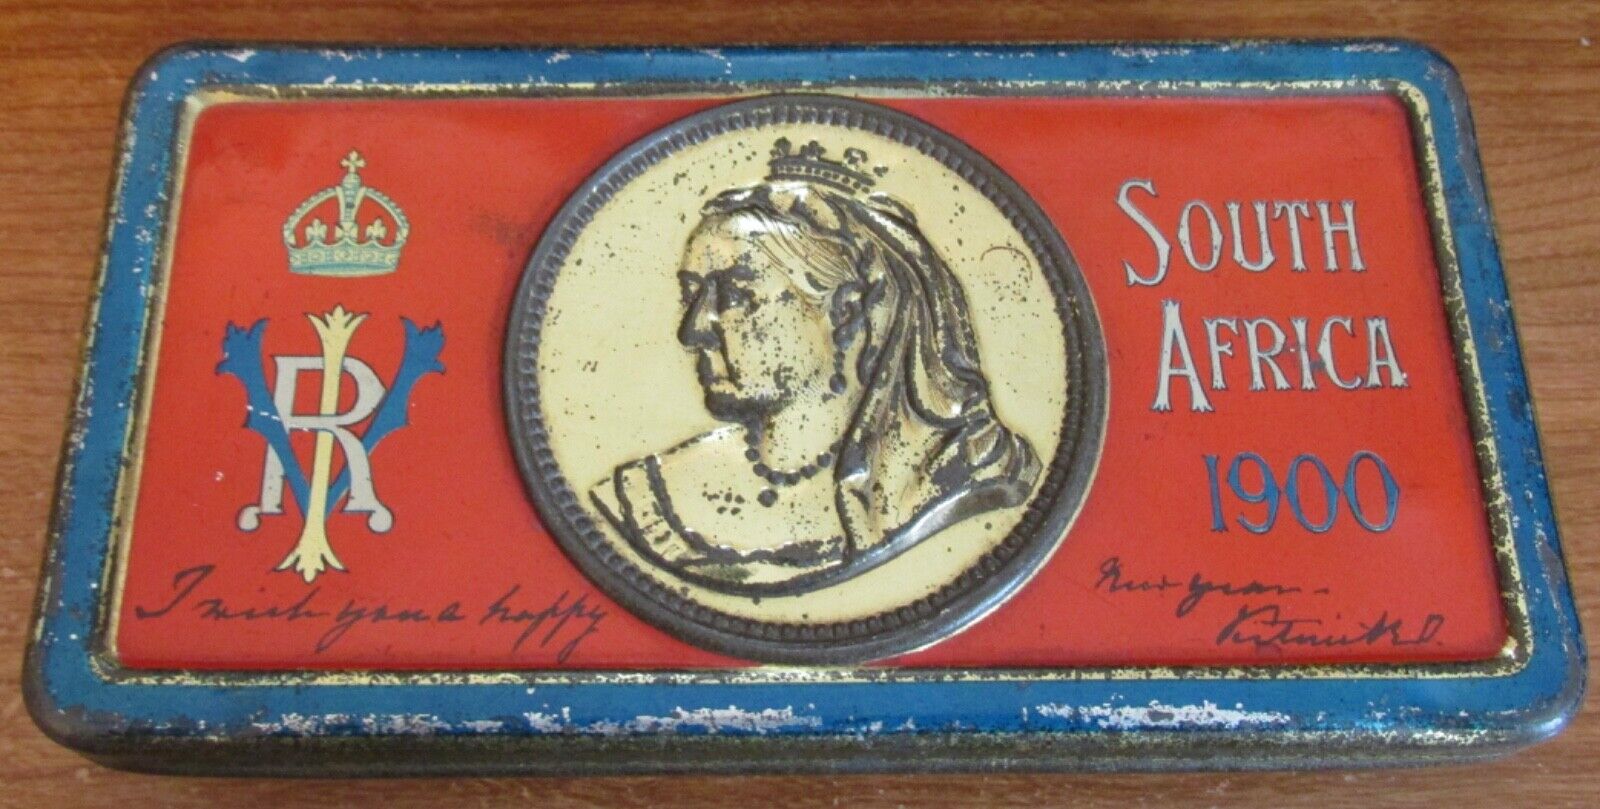 1900 BOER WAR South Africa Queen Victoria Chocolate Tin New Year Gift To Soldier